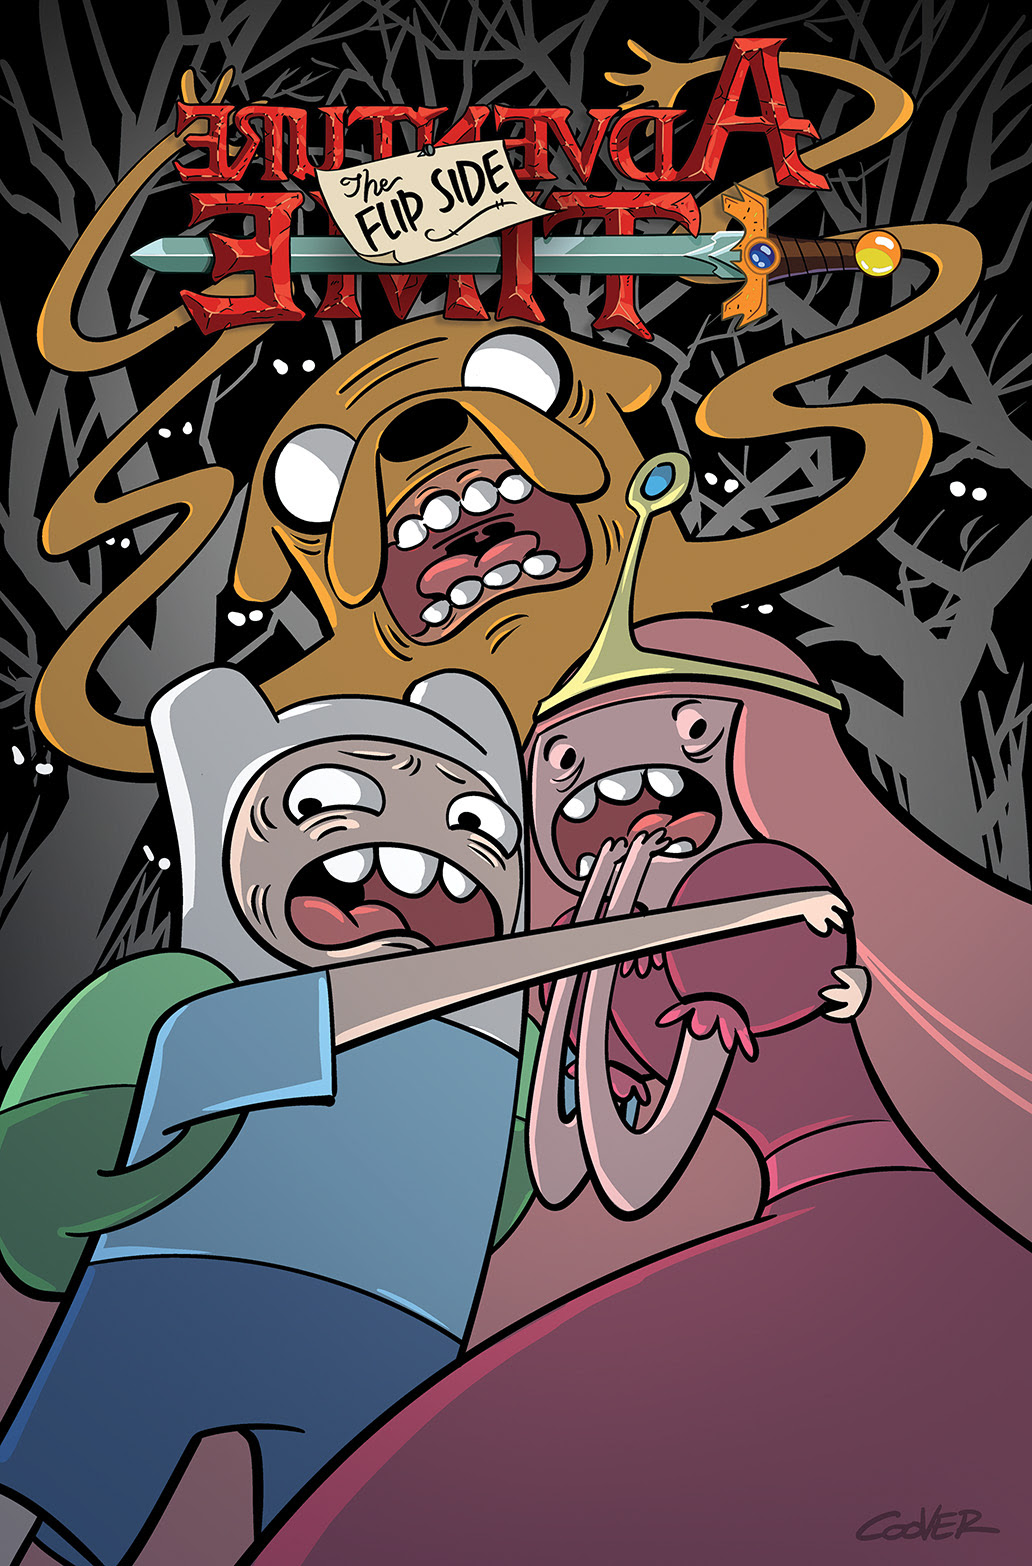 ADVENTURE TIME: THE FLIP SIDE #6 Cover A by Wook Jin Clark